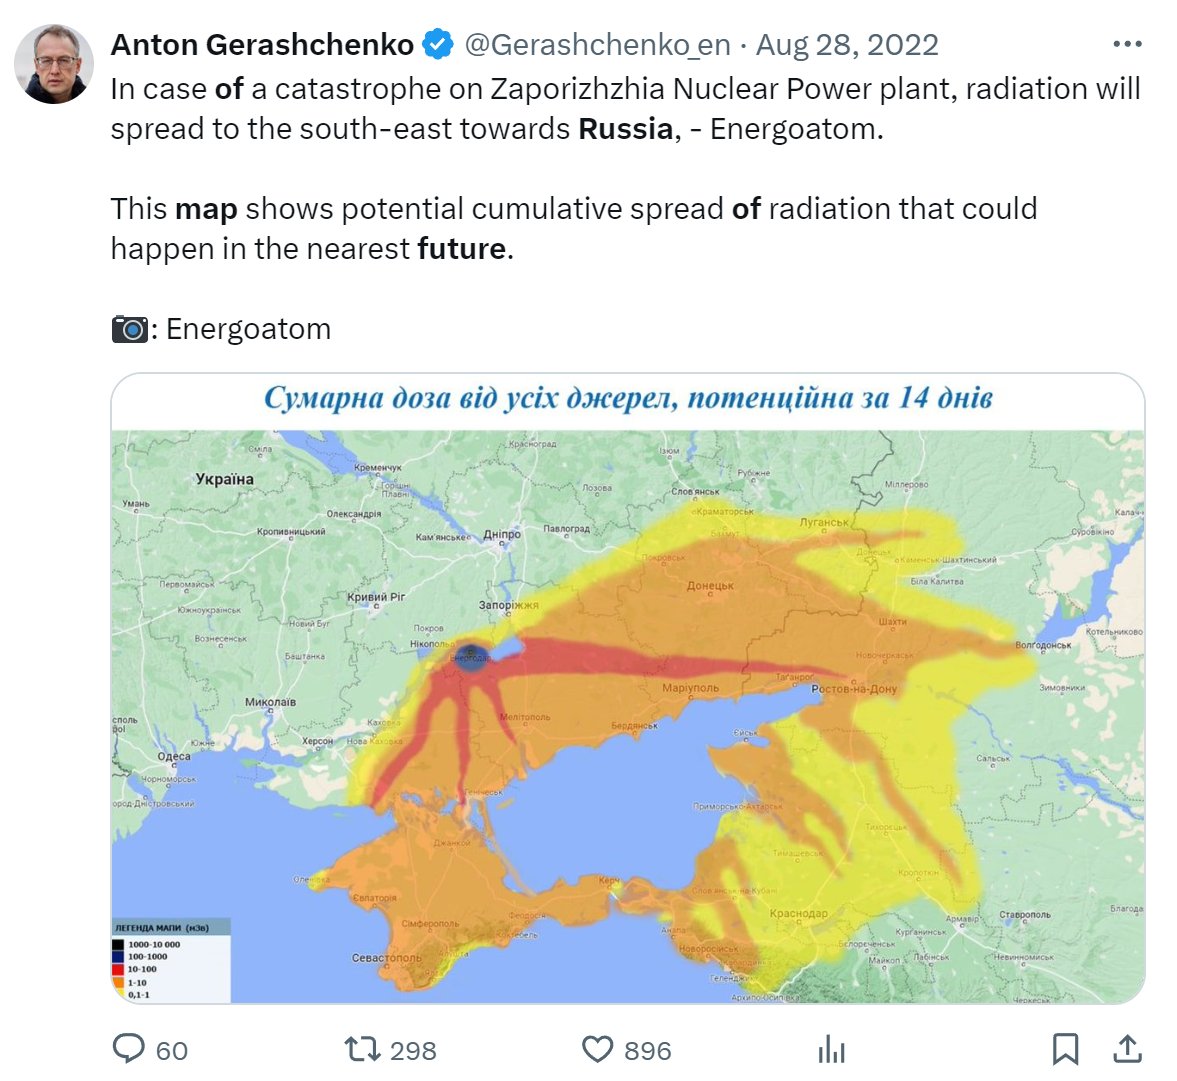 Flashback: Anton Gerashchenko illustrates why Russia wants to blow up the ZNPP.